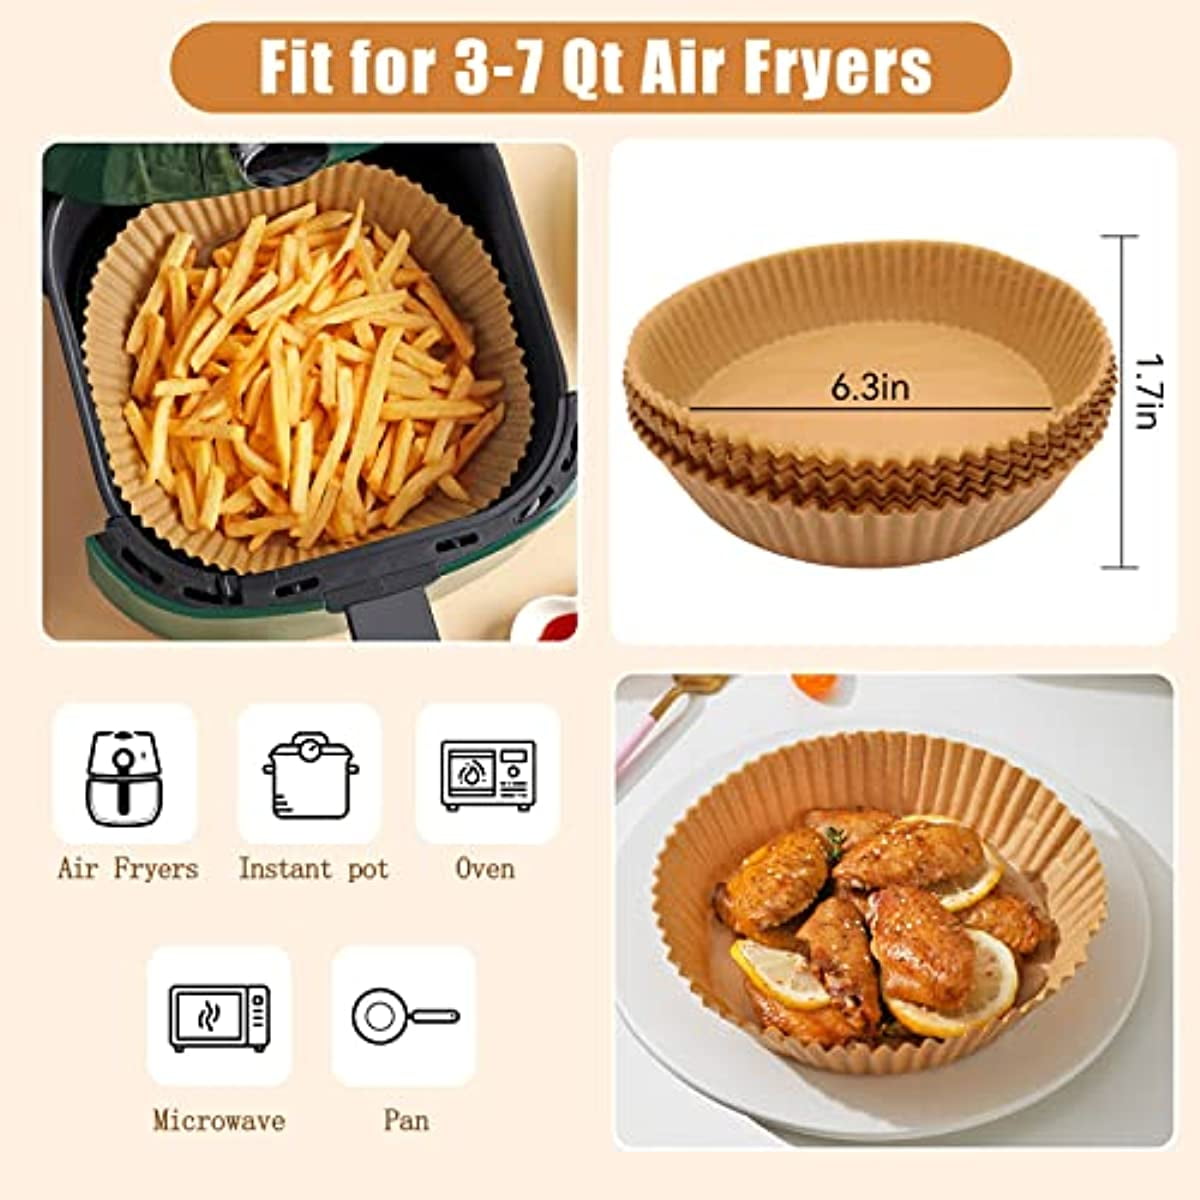 IMHAZ Round Air Fryer Paper Liners Disposable, 120pcs, 6.3 inch - Parchment Paper for Air Fryer, Oven & Steamer– Airfryer Accessories for Frying